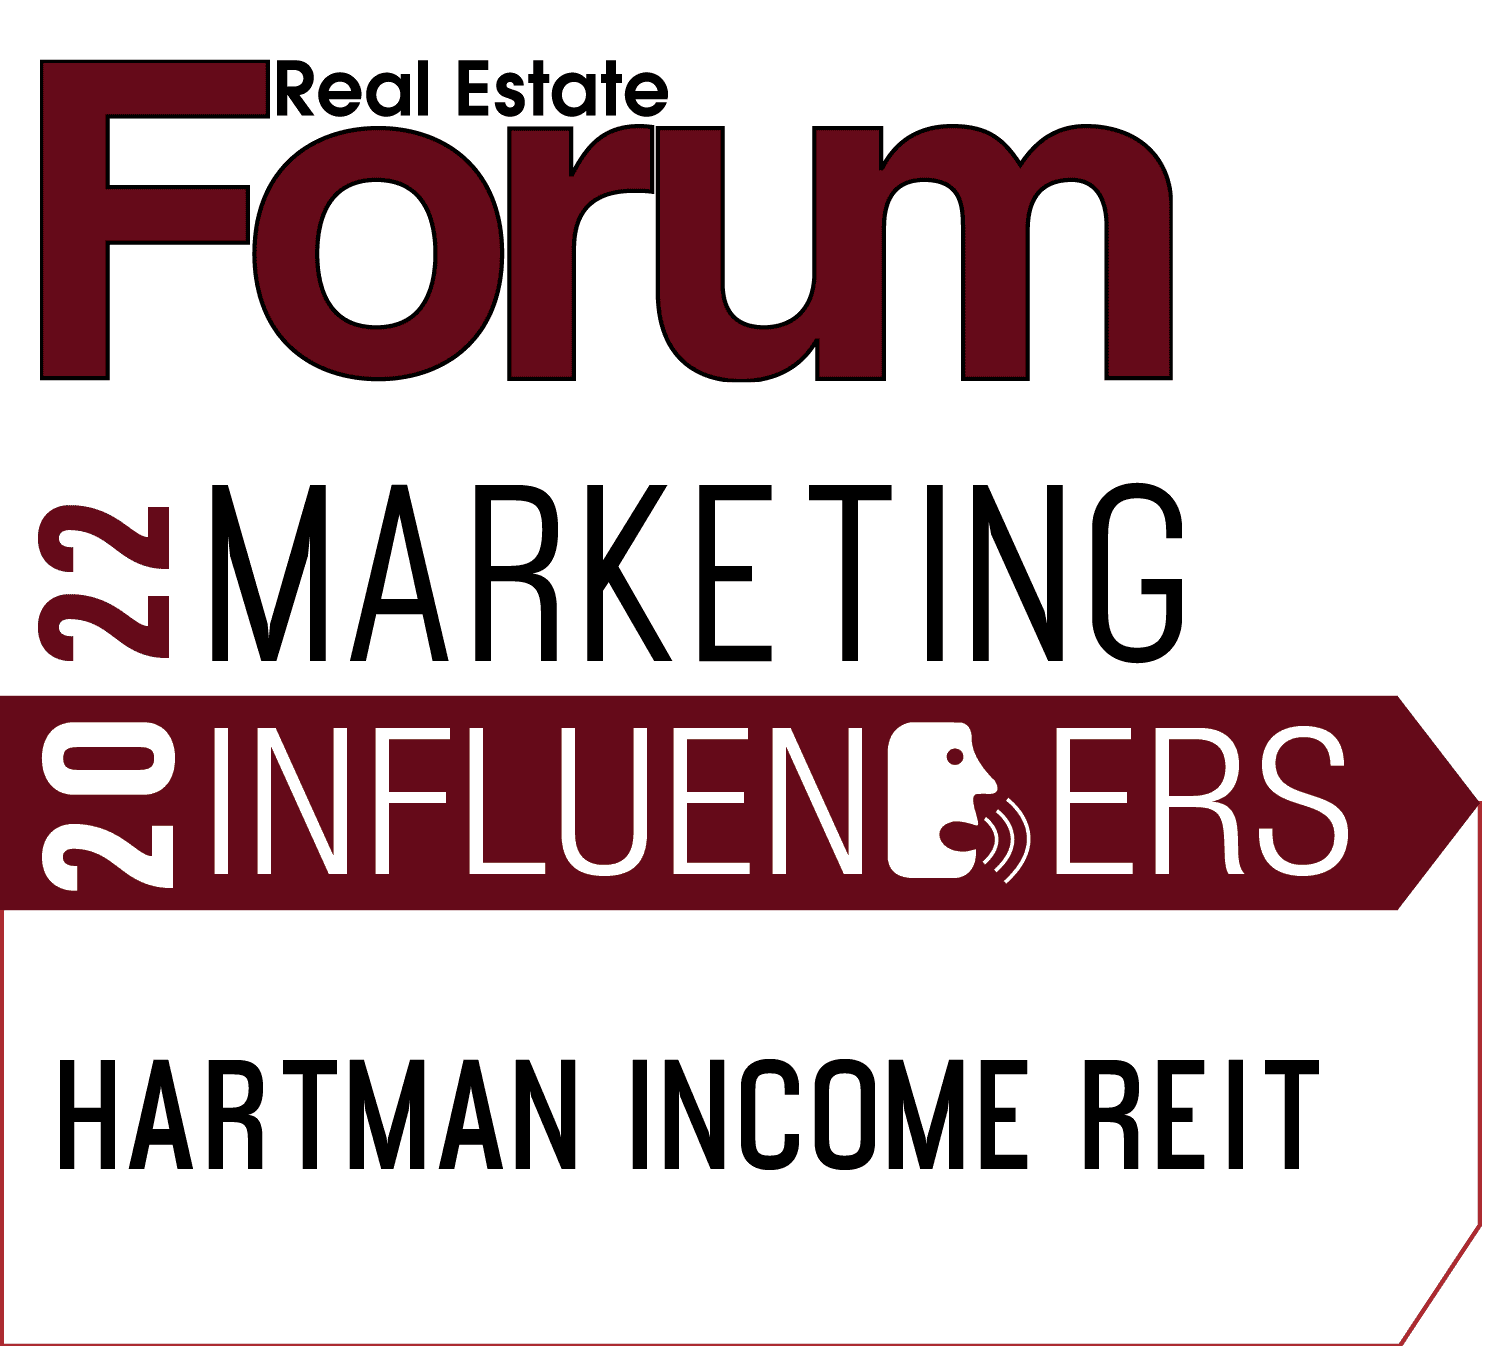 Hartman’s Marketing Team Named 2022 Marketing Influencers in CRE by GlobeSt.com Real Estate Forum